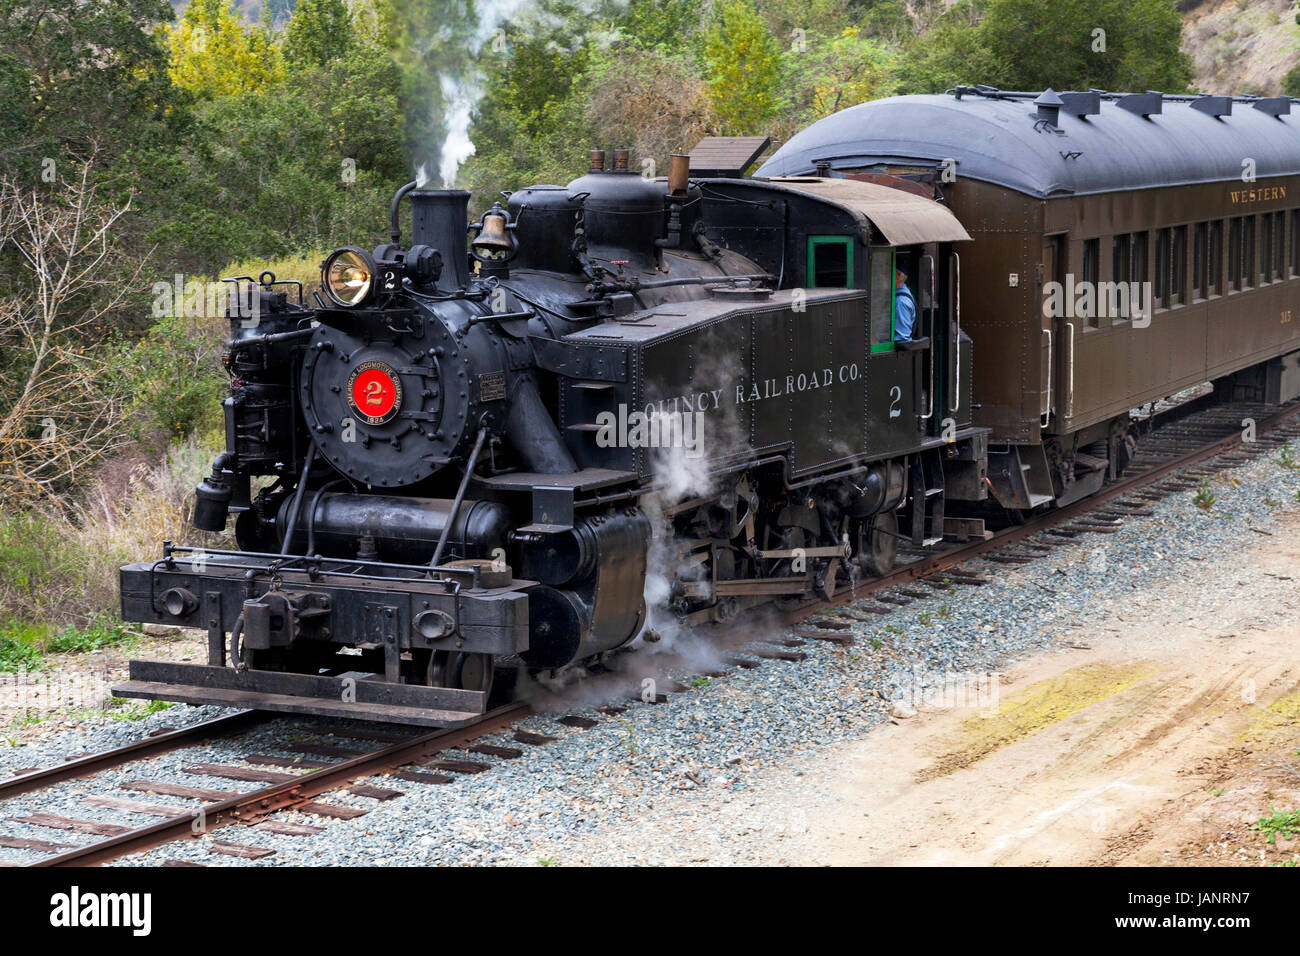 Quincy Railroad No. 2 pulls a passenger train through Niles Canyon for the Niles Canyon Railway. Built in 1924 by ALCO in Schenectady, NY, the Quincy  Stock Photo